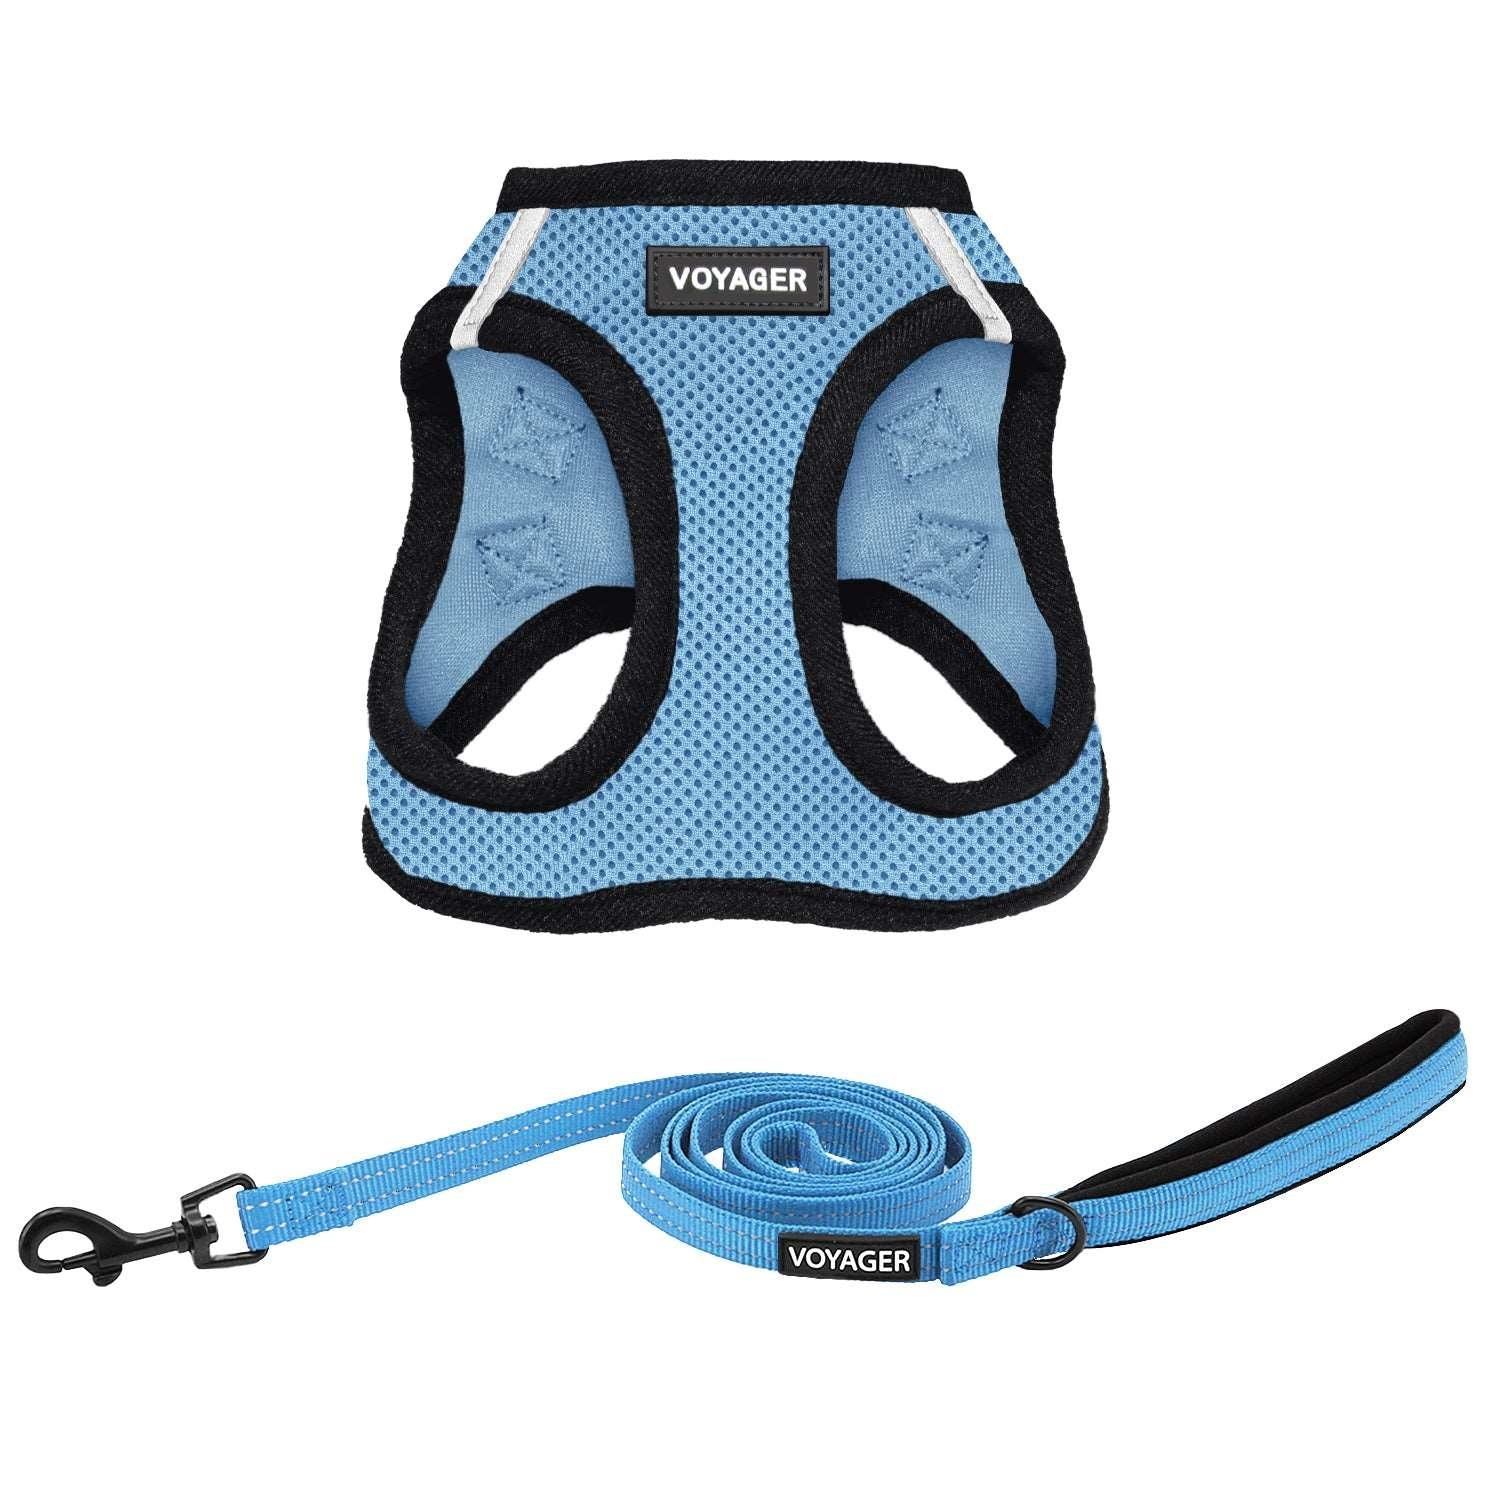 Step-in Air Harness & Leash Combo Set